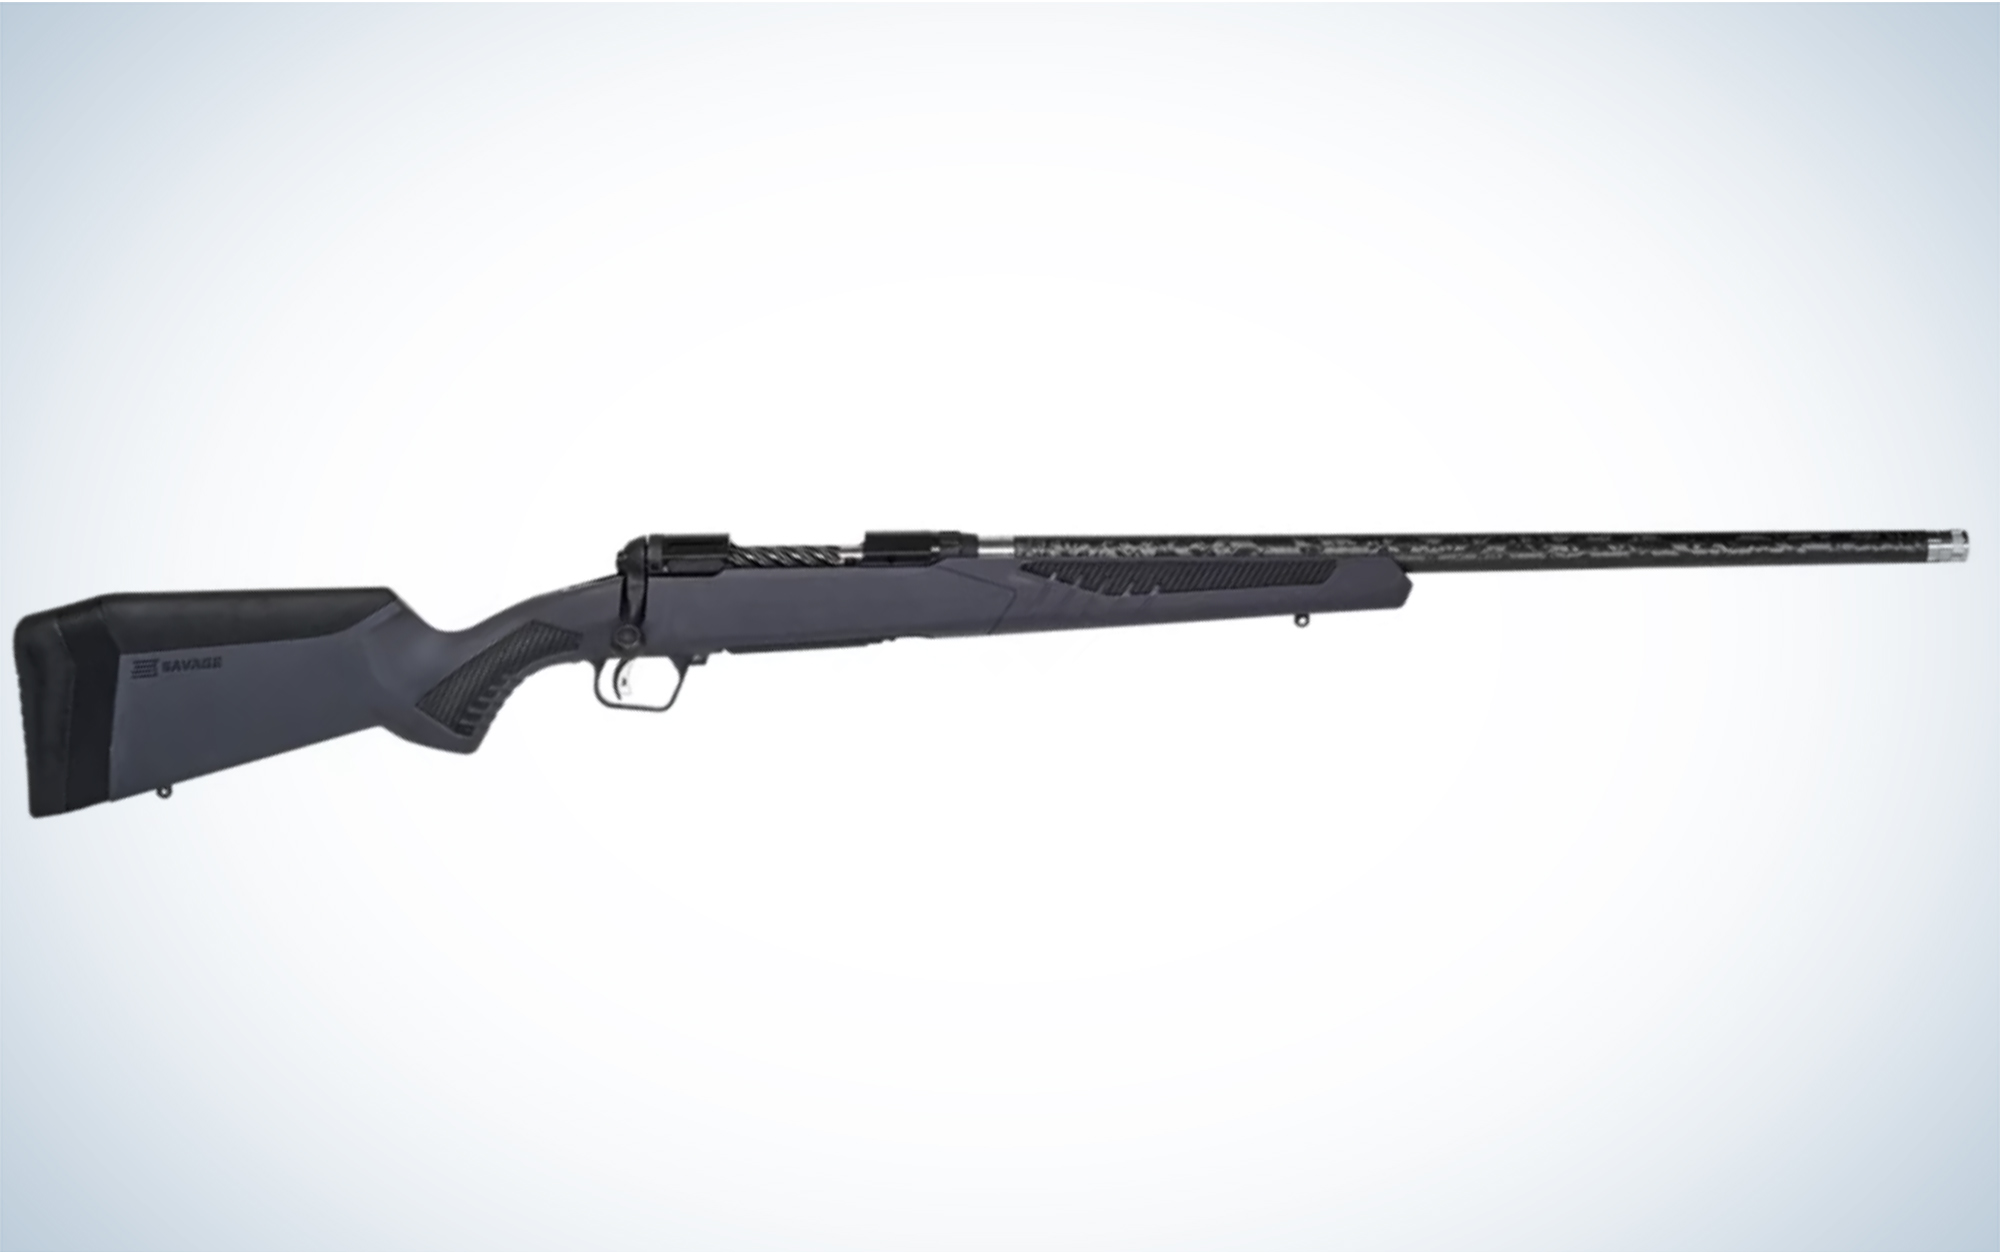 The Savage Model 110 Ultralite is one of the best rifles for mountain hunts.